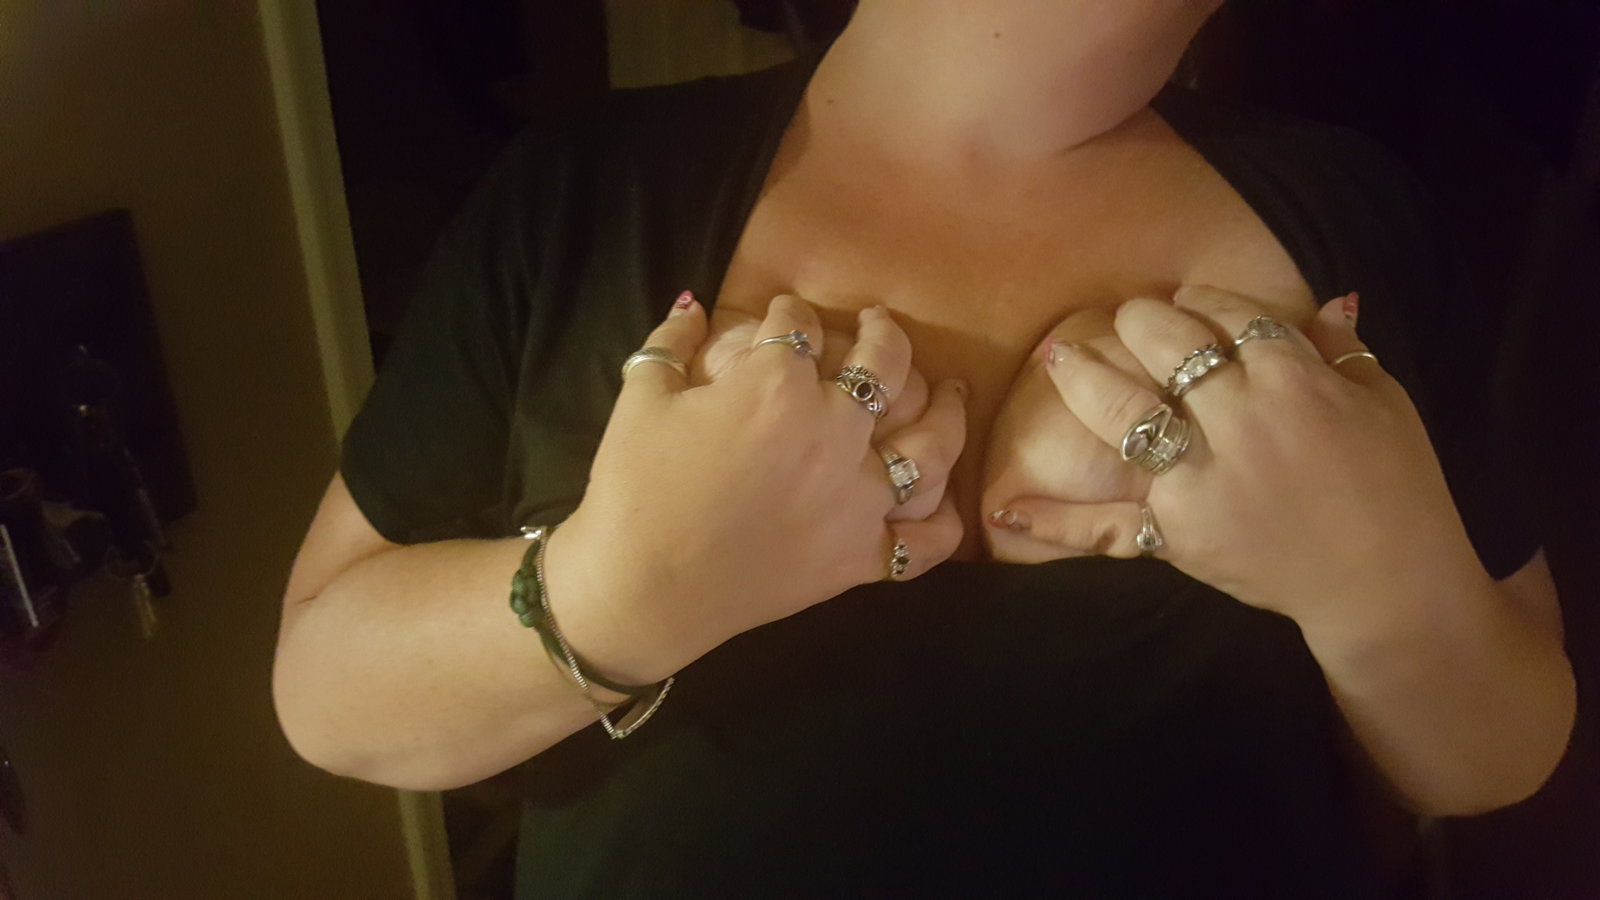 Photo by Dawn42D with the username @Dawn42D,  August 2, 2017 at 11:43 AM and the text says 'Two fingers in her dripping wet pussy and she&rsquo;s groping her tits and pinching her nipples #big  #naturals  #big  #tits  #bbw  #bbw  #wife  #hot  #wife  #slut  #wife  #playing  #with  #herself  #nipple  #pinching  #WVHotBBW  #Dawn42D'